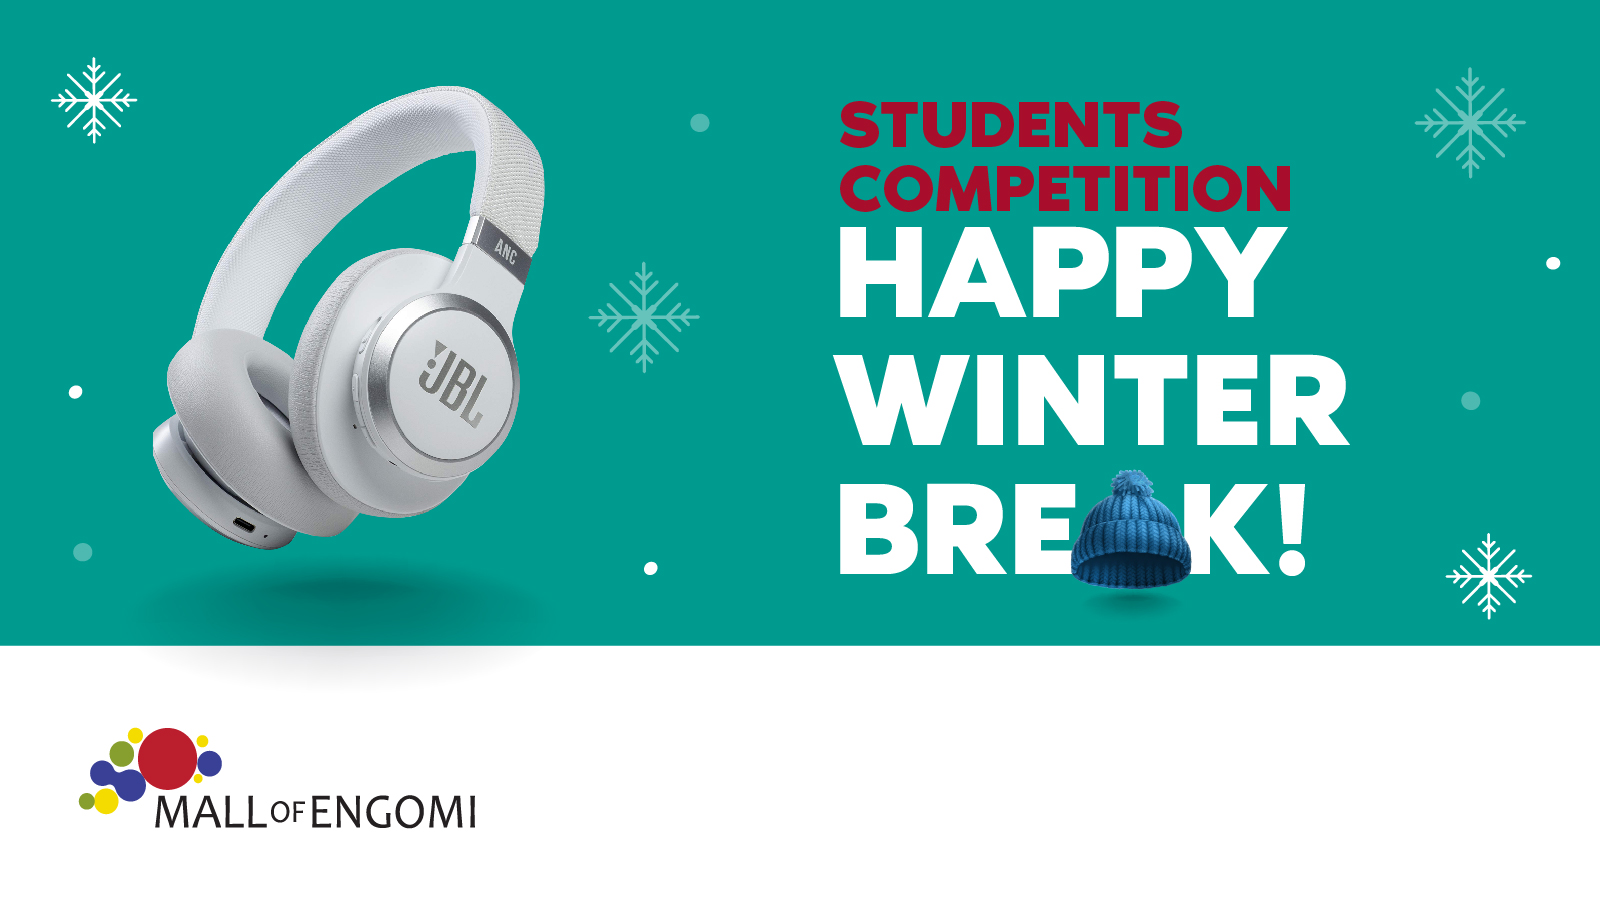 JBL Headphones Students Competition